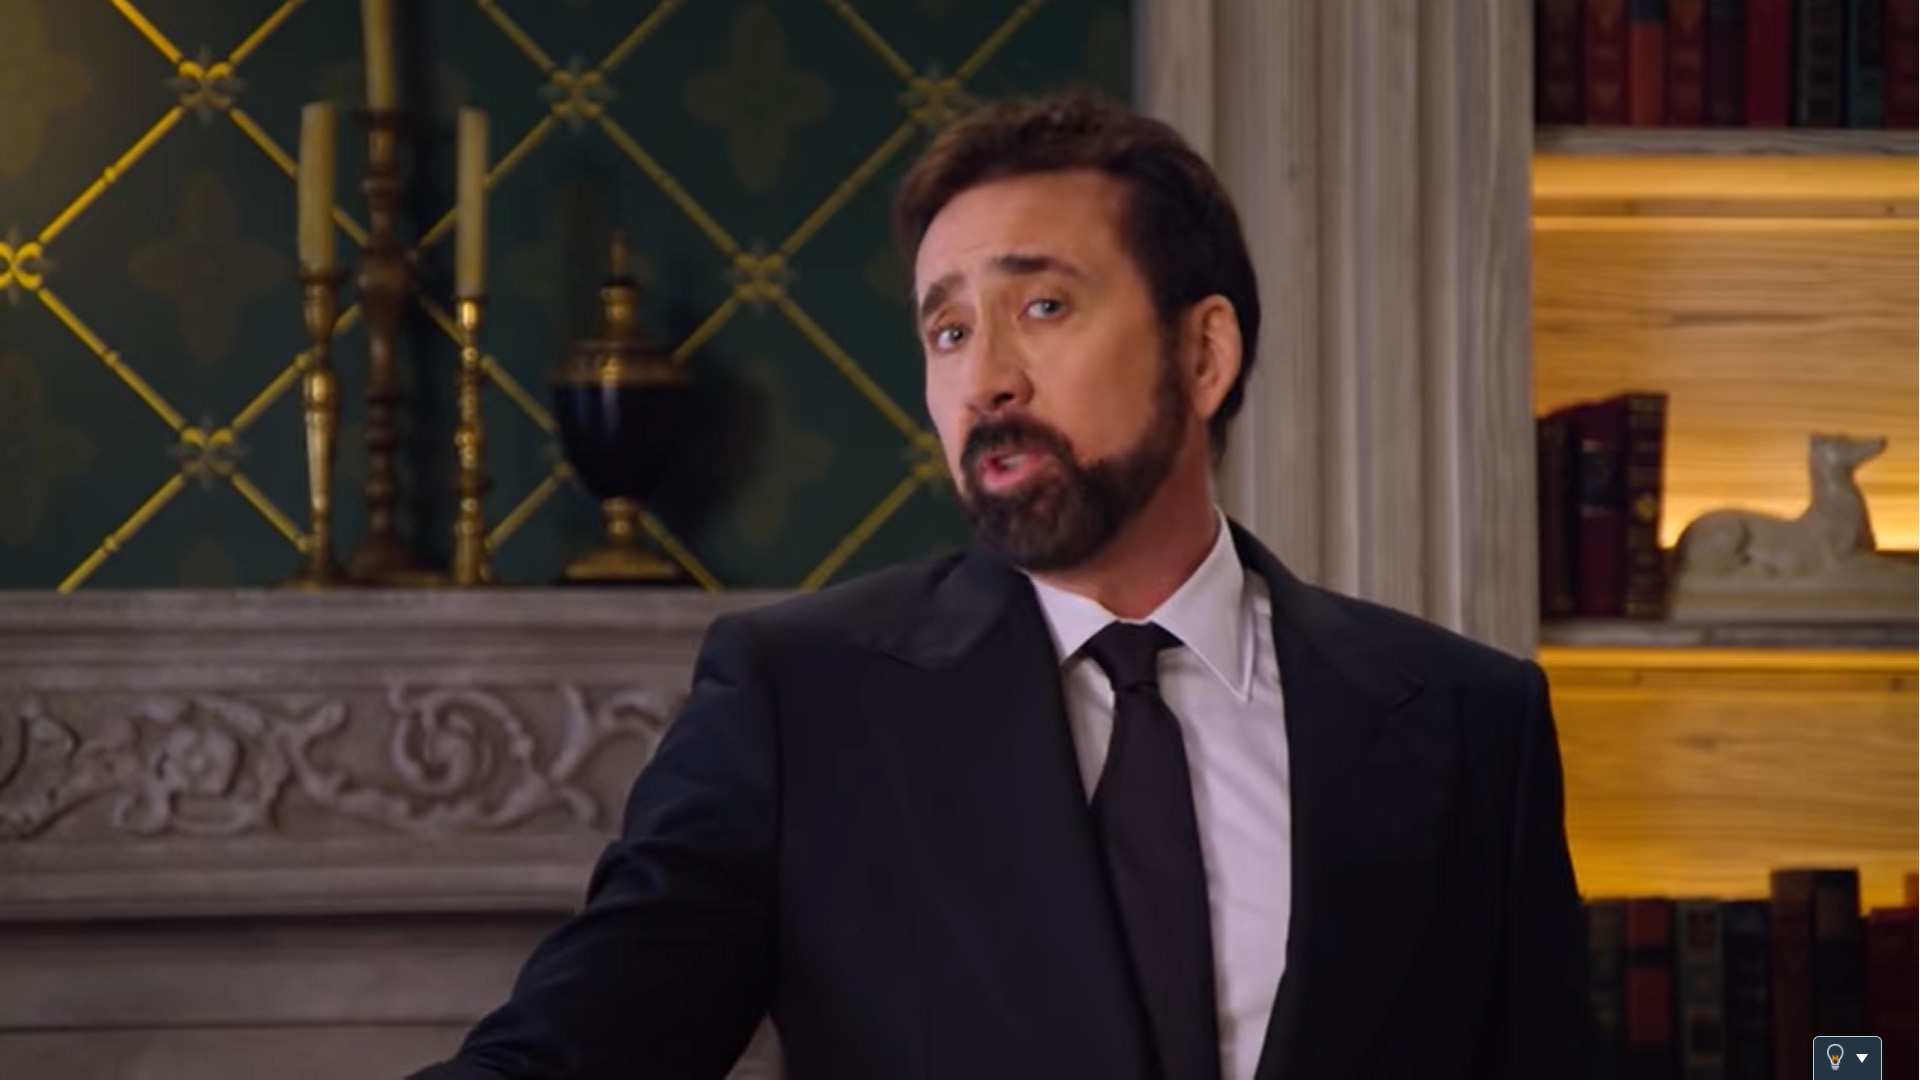 Trailer Watch Nicolas Cage To Teach A Course On History Of Swear Words On Netflix 8days 